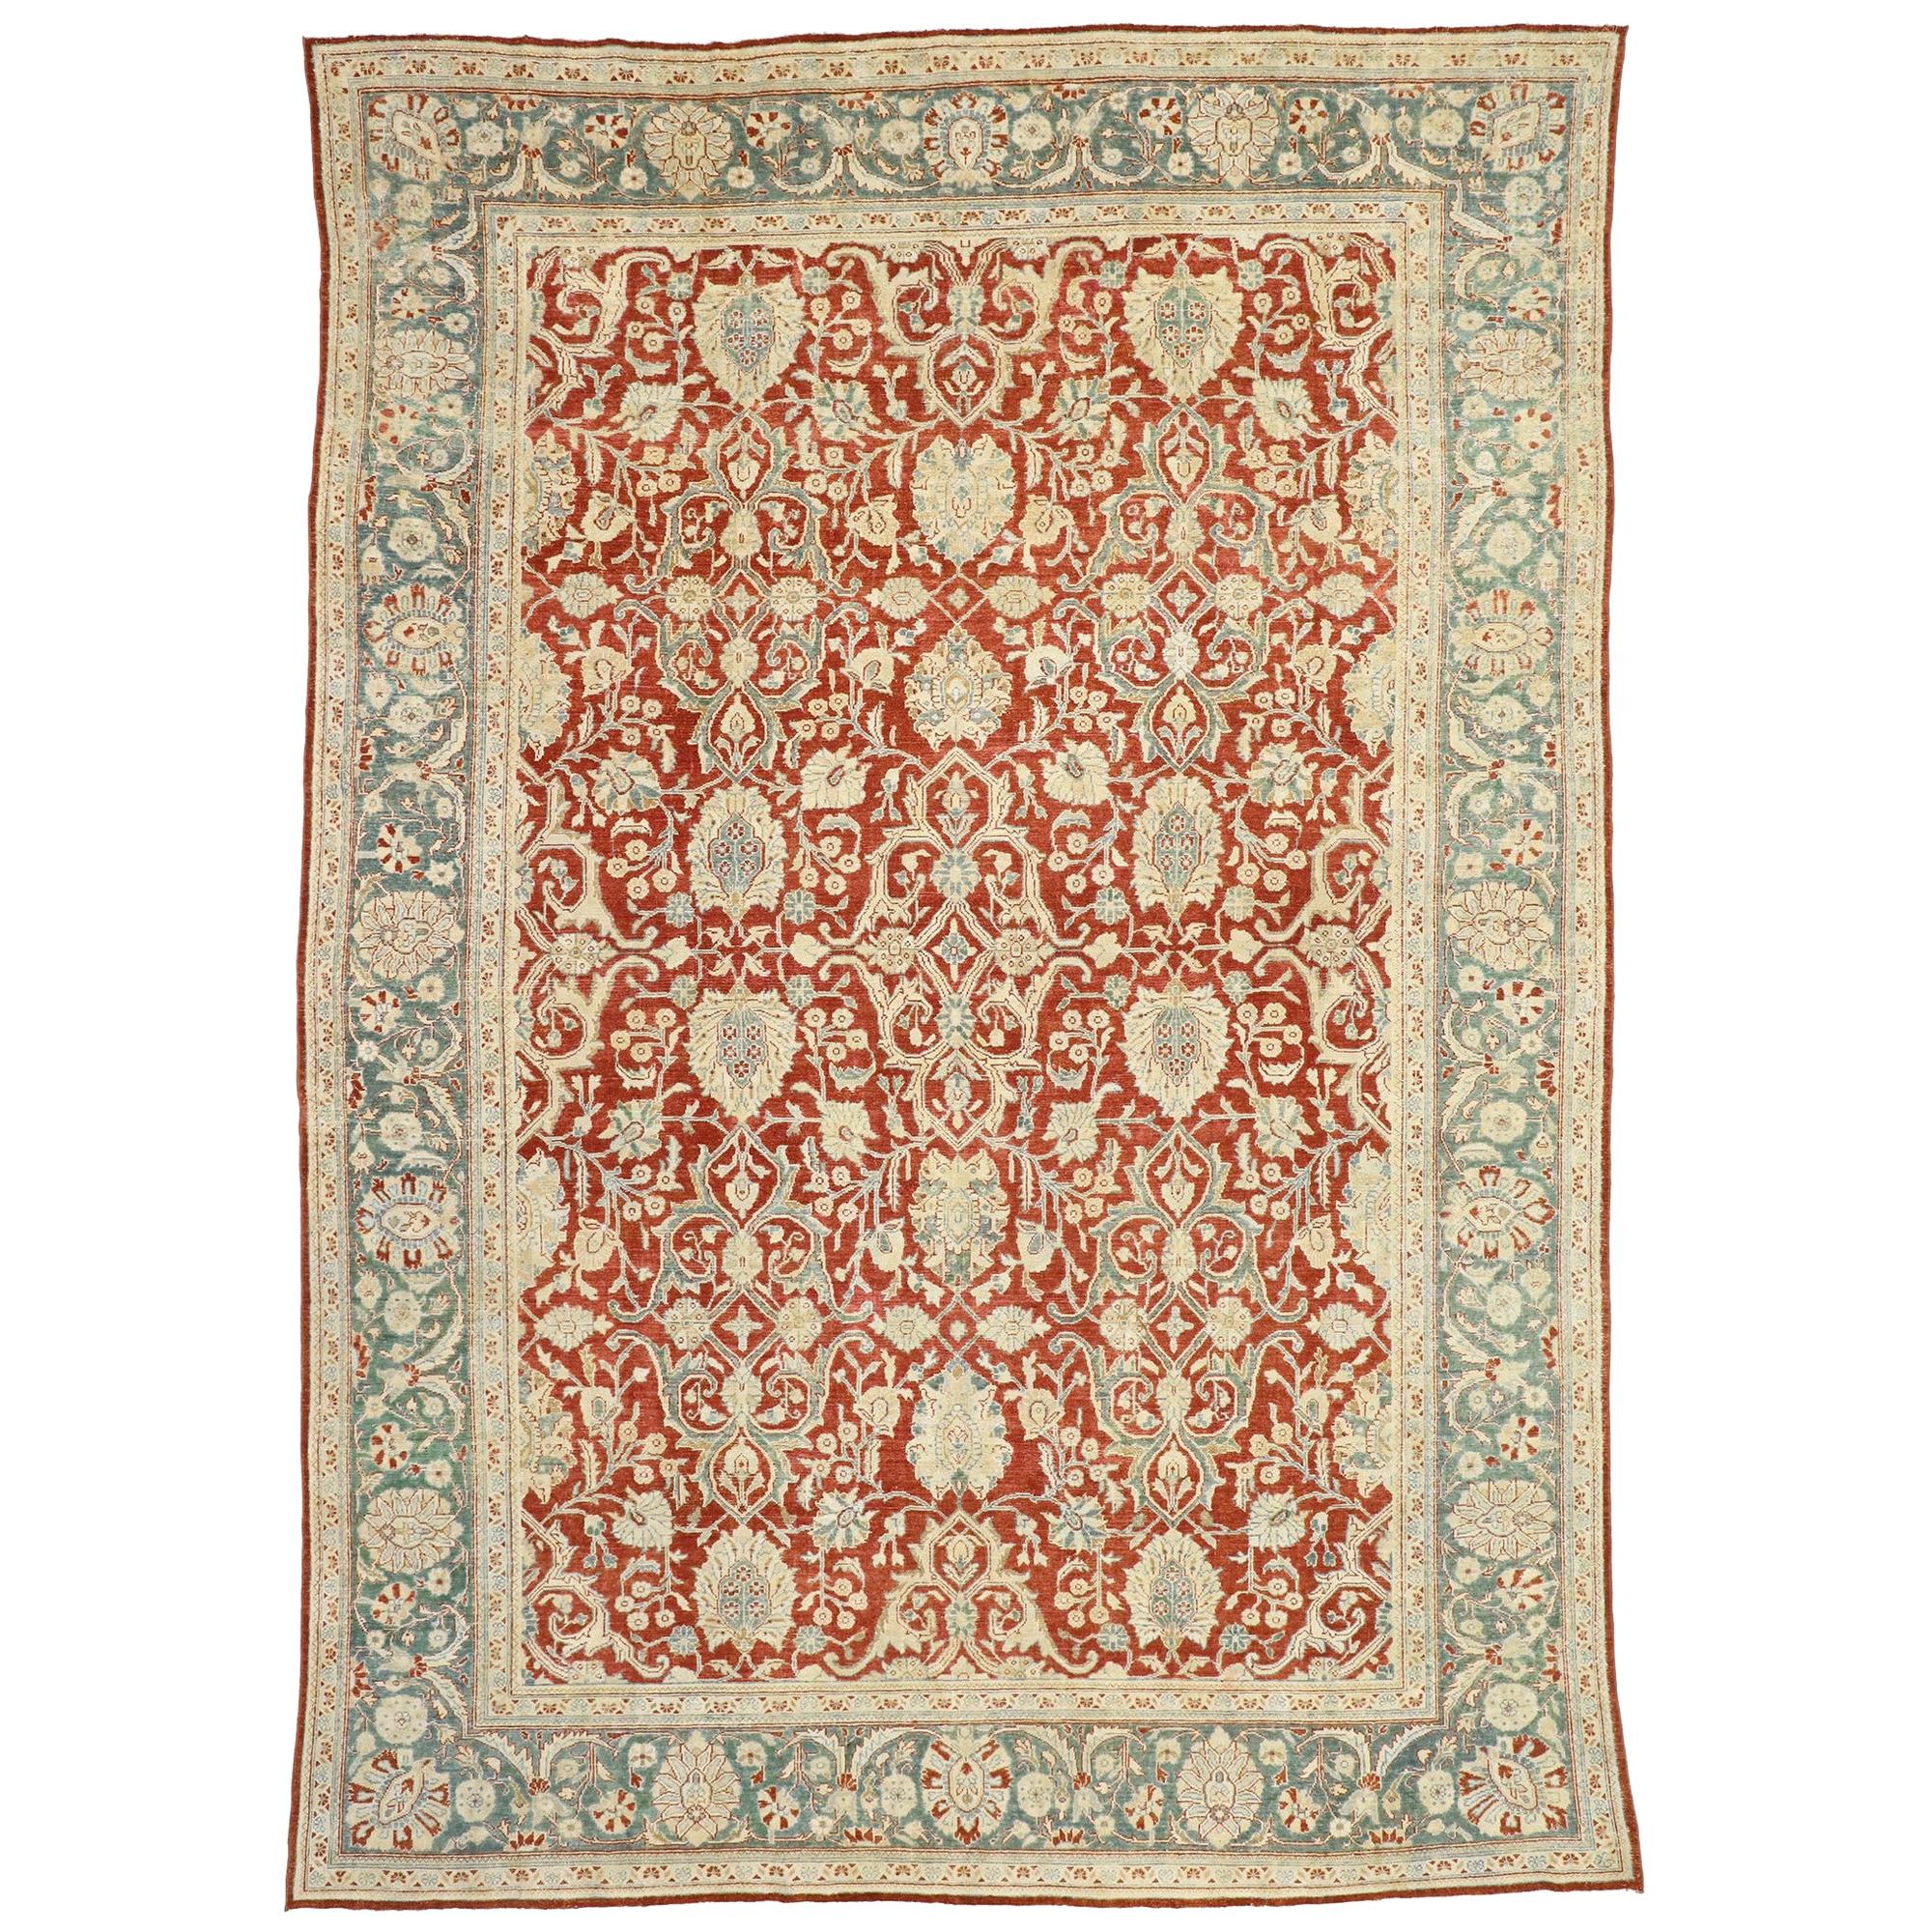 Distressed Antique Persian Mahal Design Rug with English Manor Chintz Style